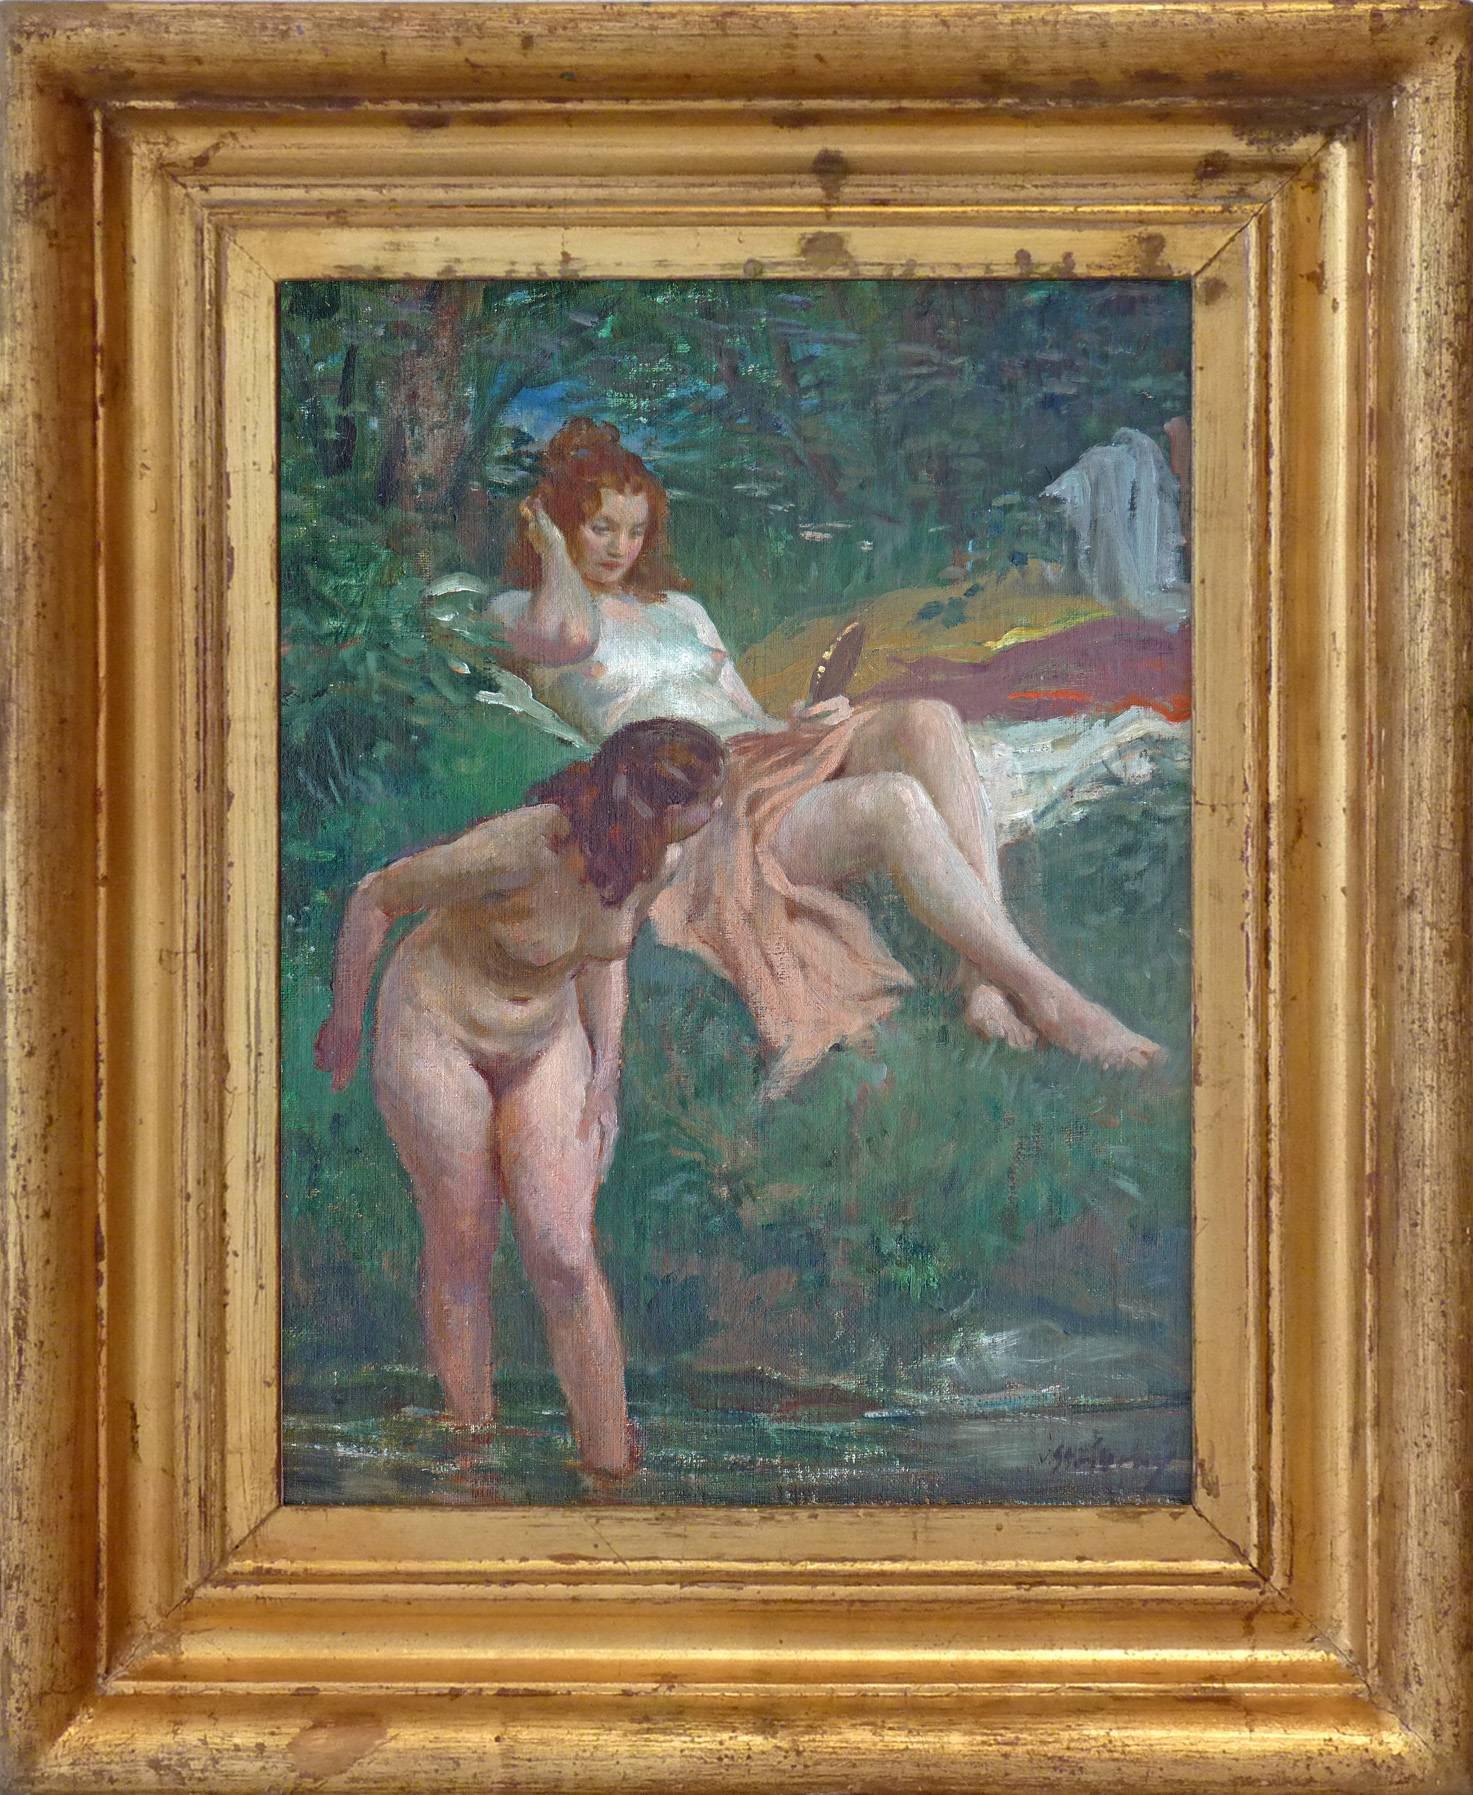 Oil on canvas, signed lower right.
Painting size 15.95 x 12.01 in. (40.5 x 30.5 cm)
Housed in the original frame, size 22.05 x 18.11 in. (56 x 46 cm)

The very early datable work is one of the finest examples of the artist's oeuvre. It clearly